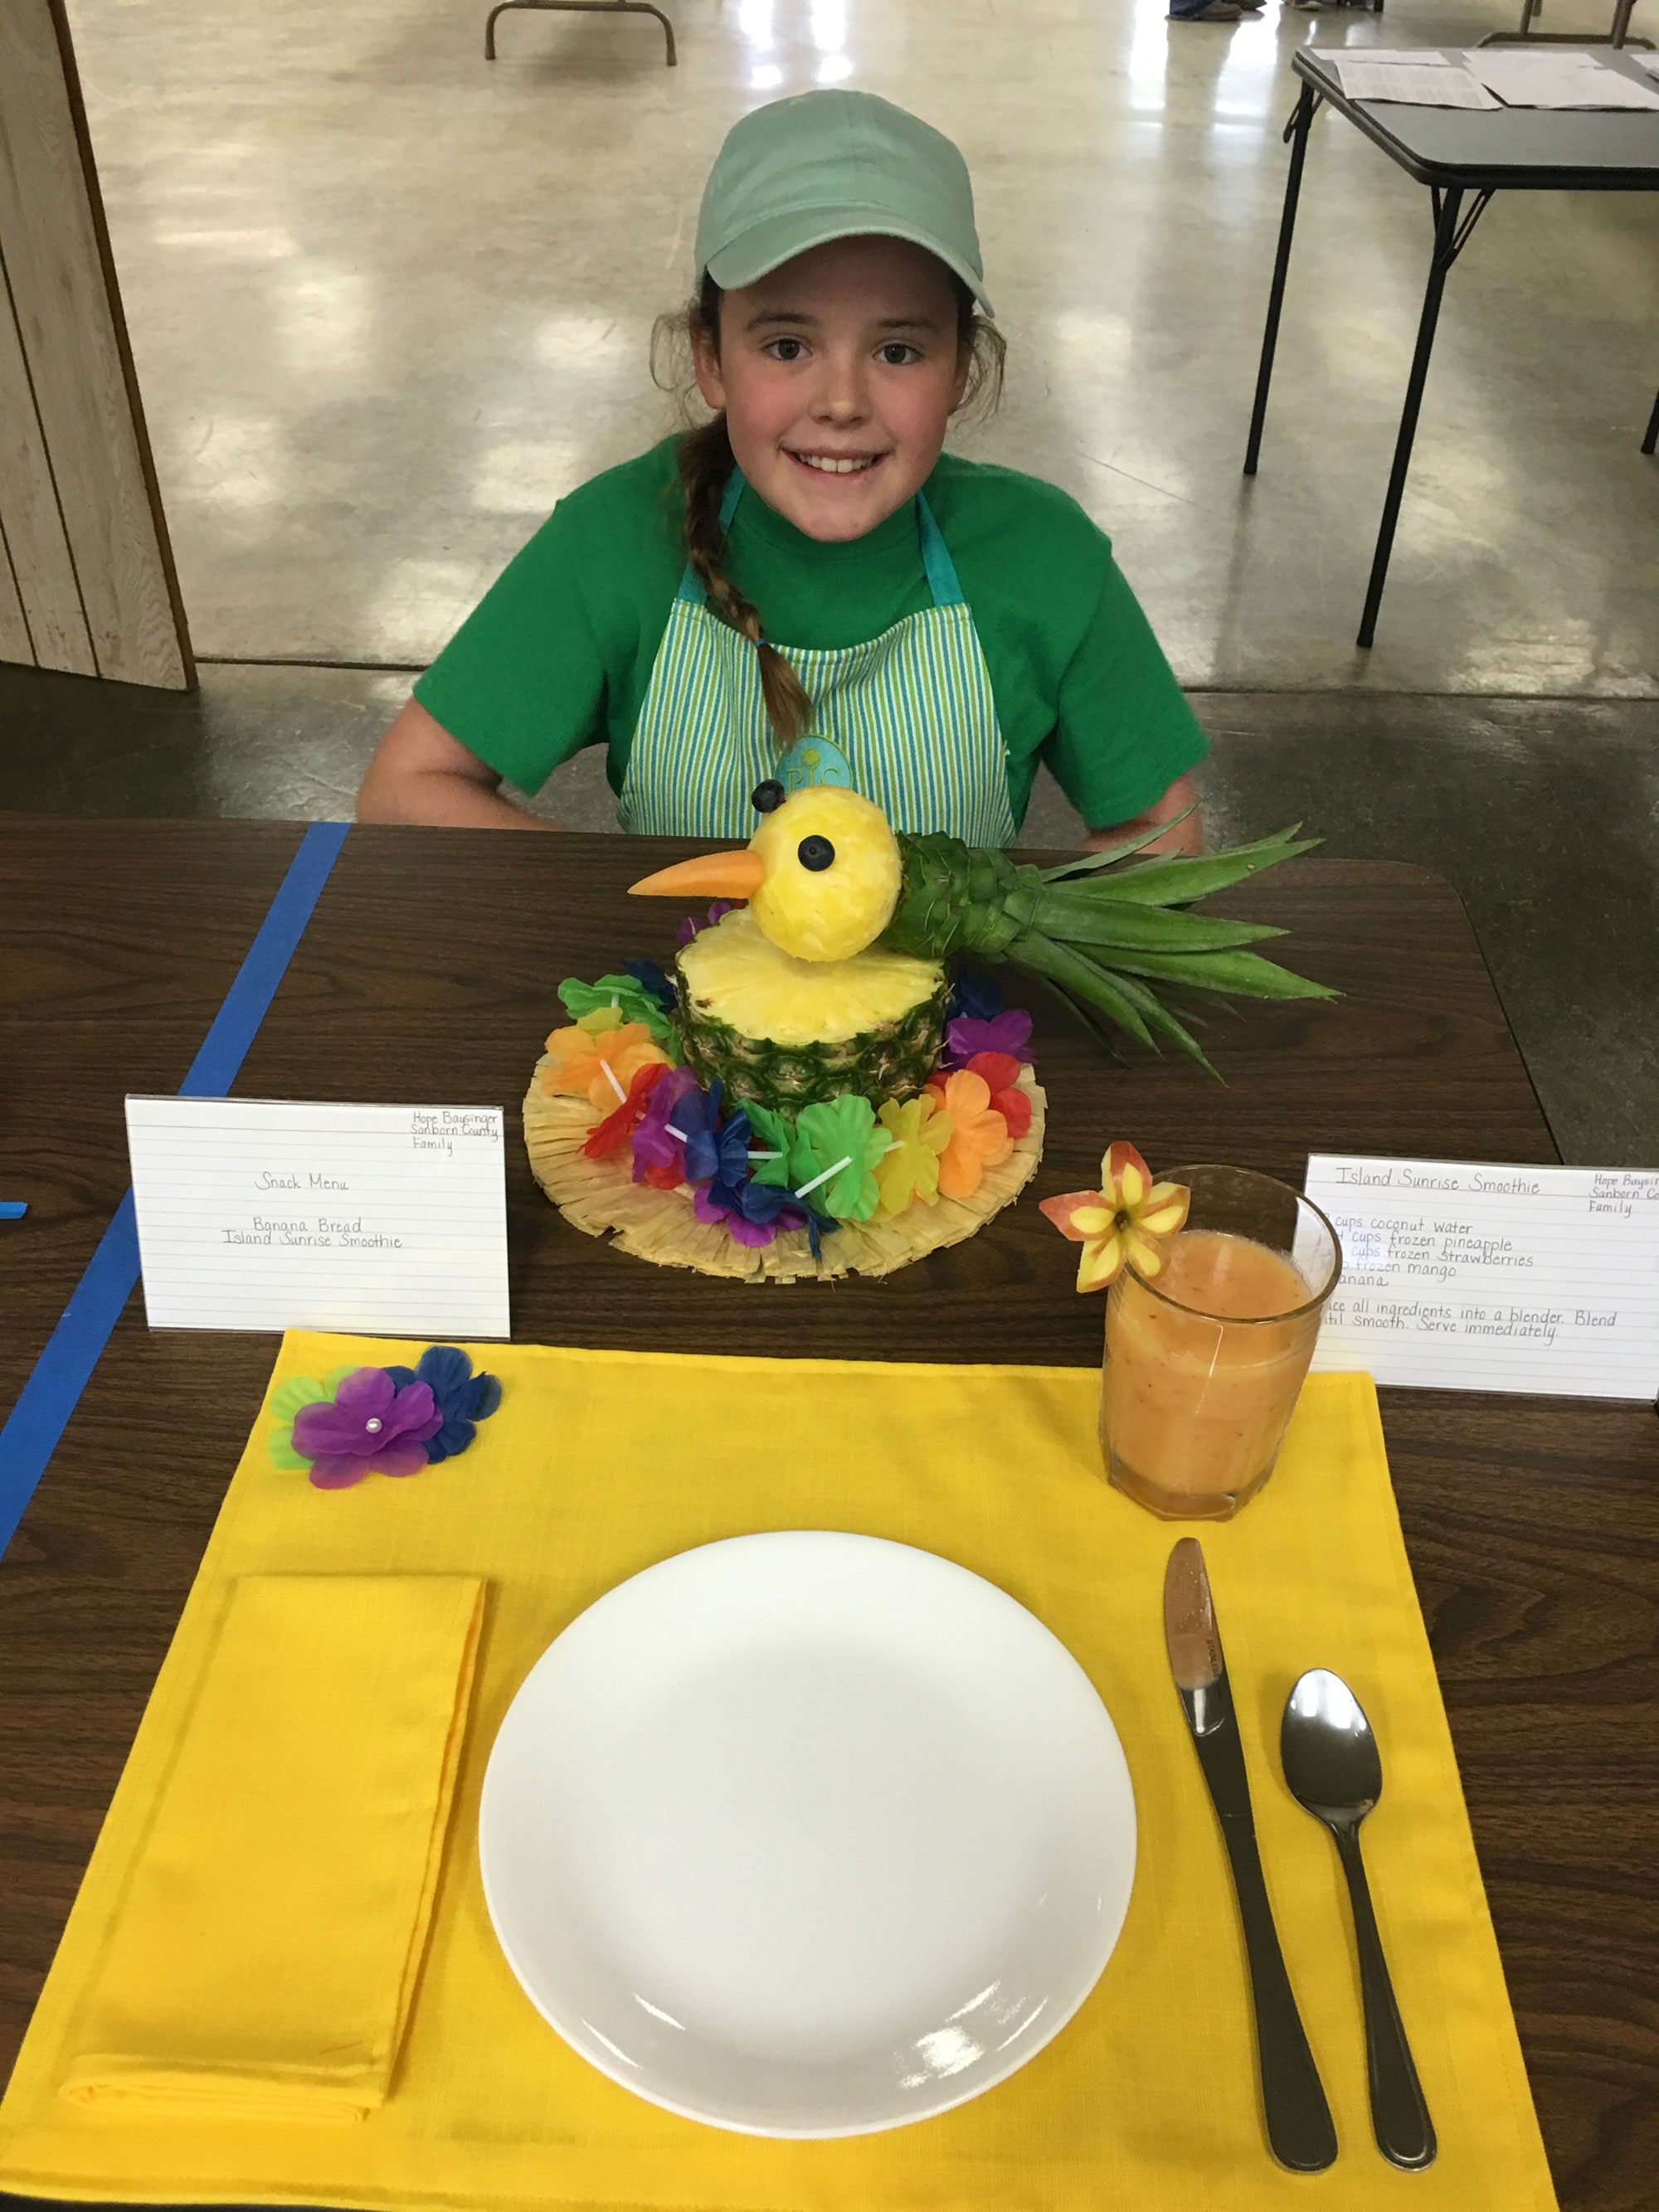 Hope Baysinger presenting a special foods project at a table.